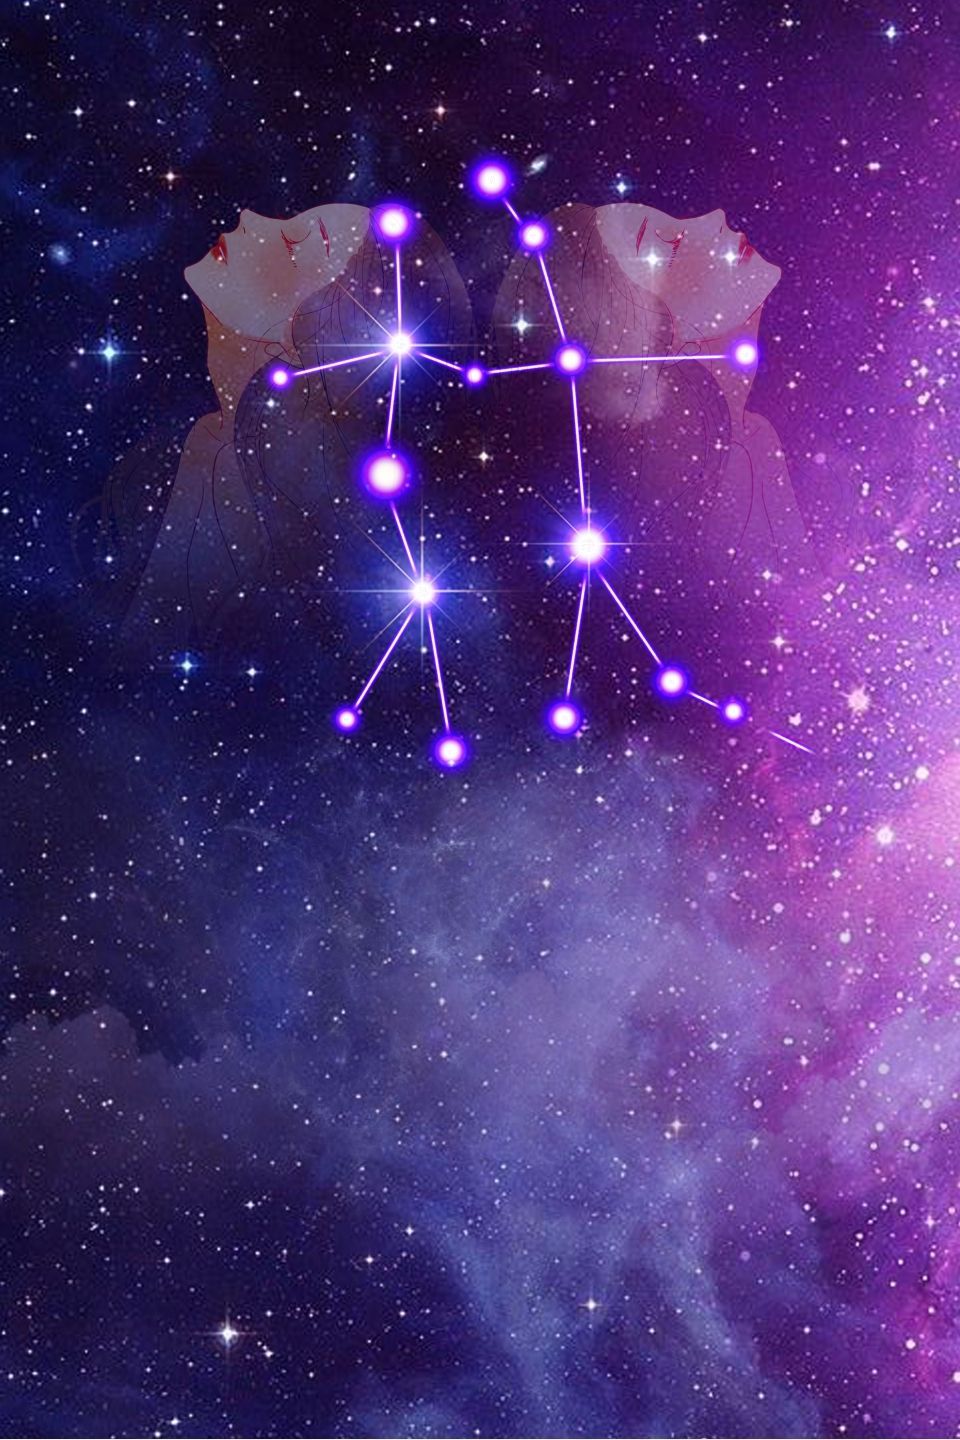 The sign of Gemini, with two people holding hands, against a starry purple and blue background. - Constellation, Gemini